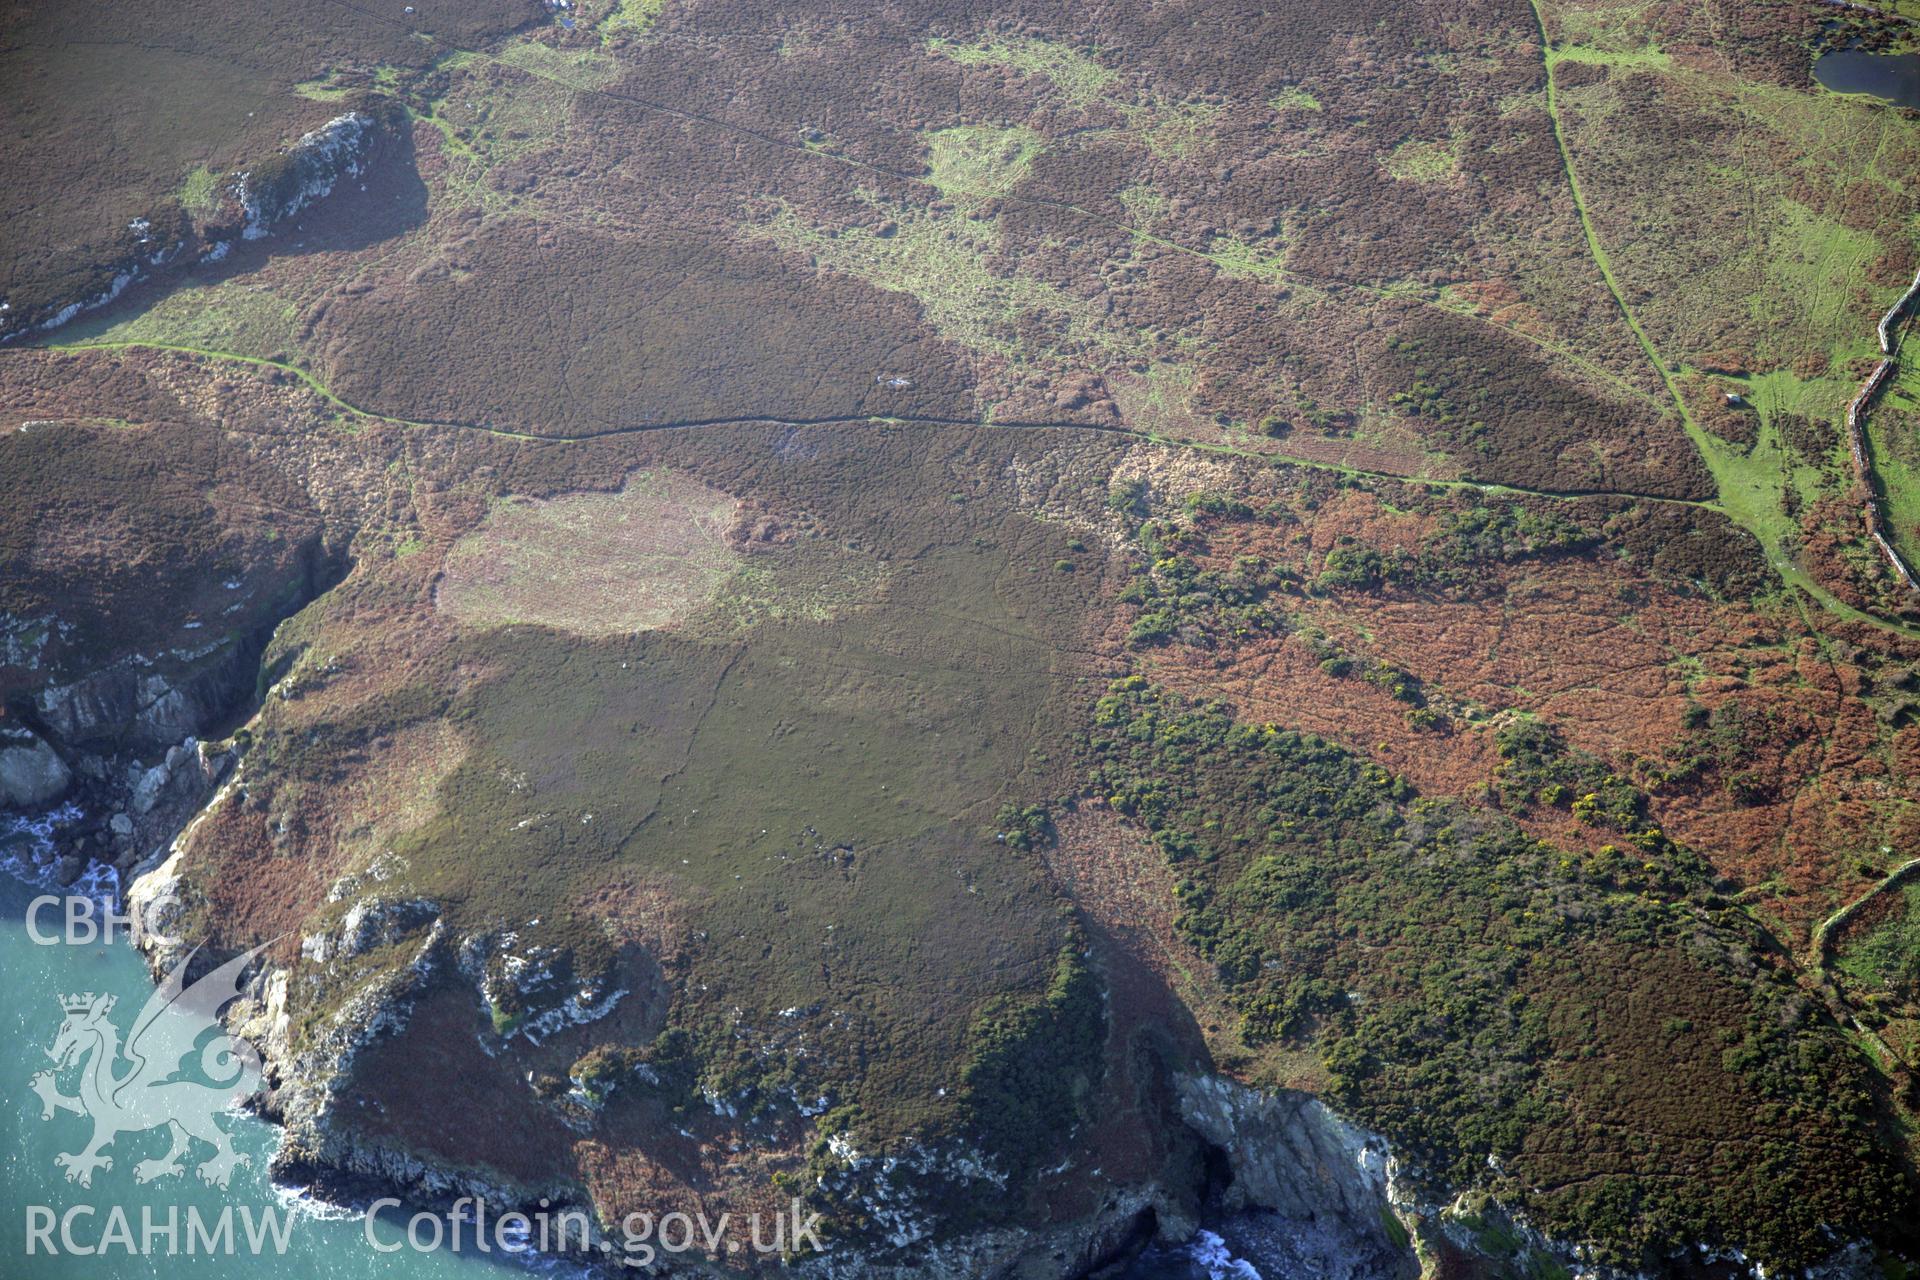 RCAHMW colour oblique photograph of ? Ramsey Island. Taken by O. Davies & T. Driver on 22/11/2013.